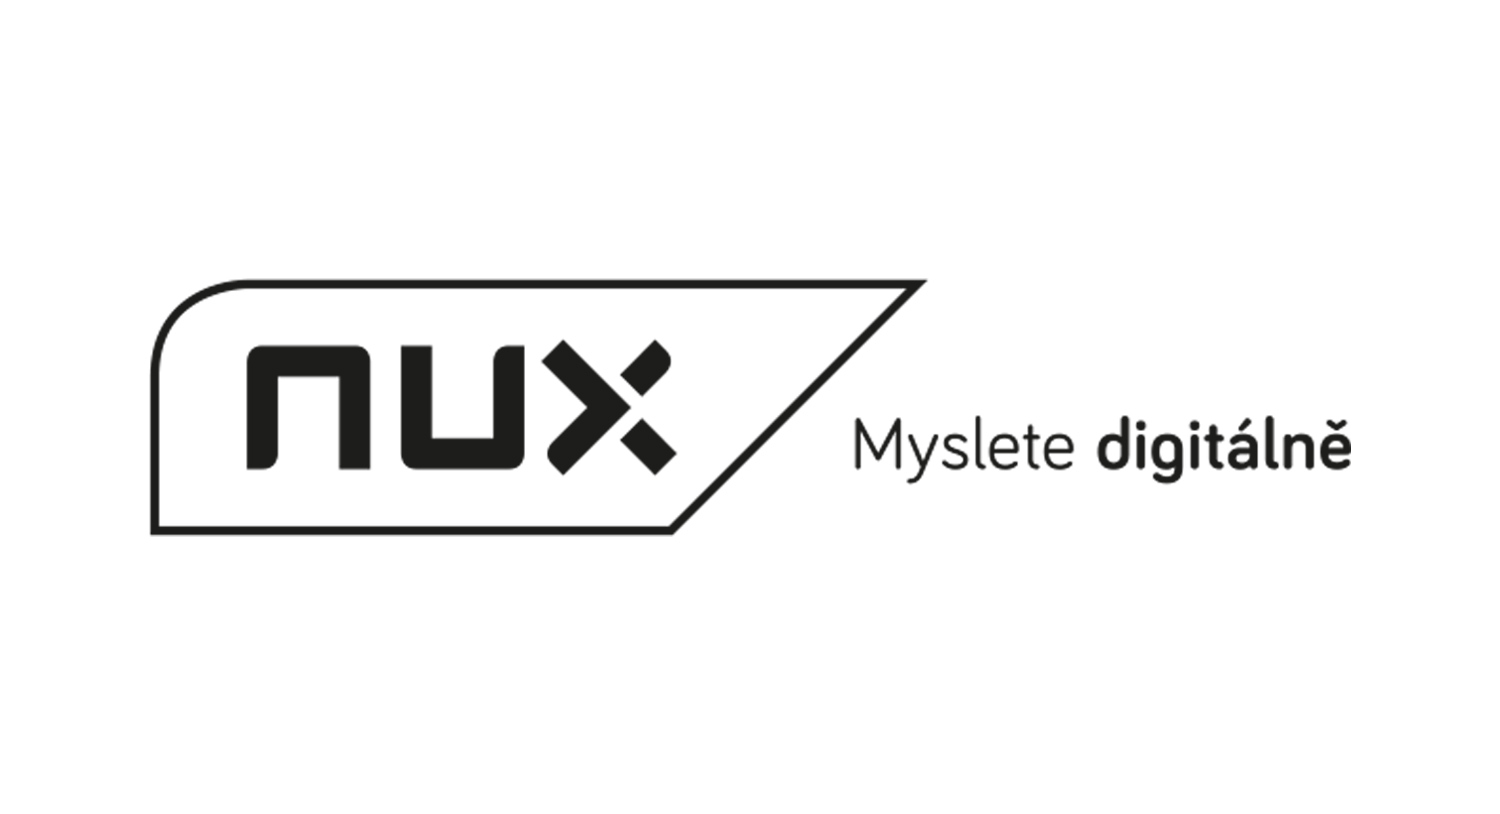 [album/Products_Model_Product/98/nux_logo_2.jpg]